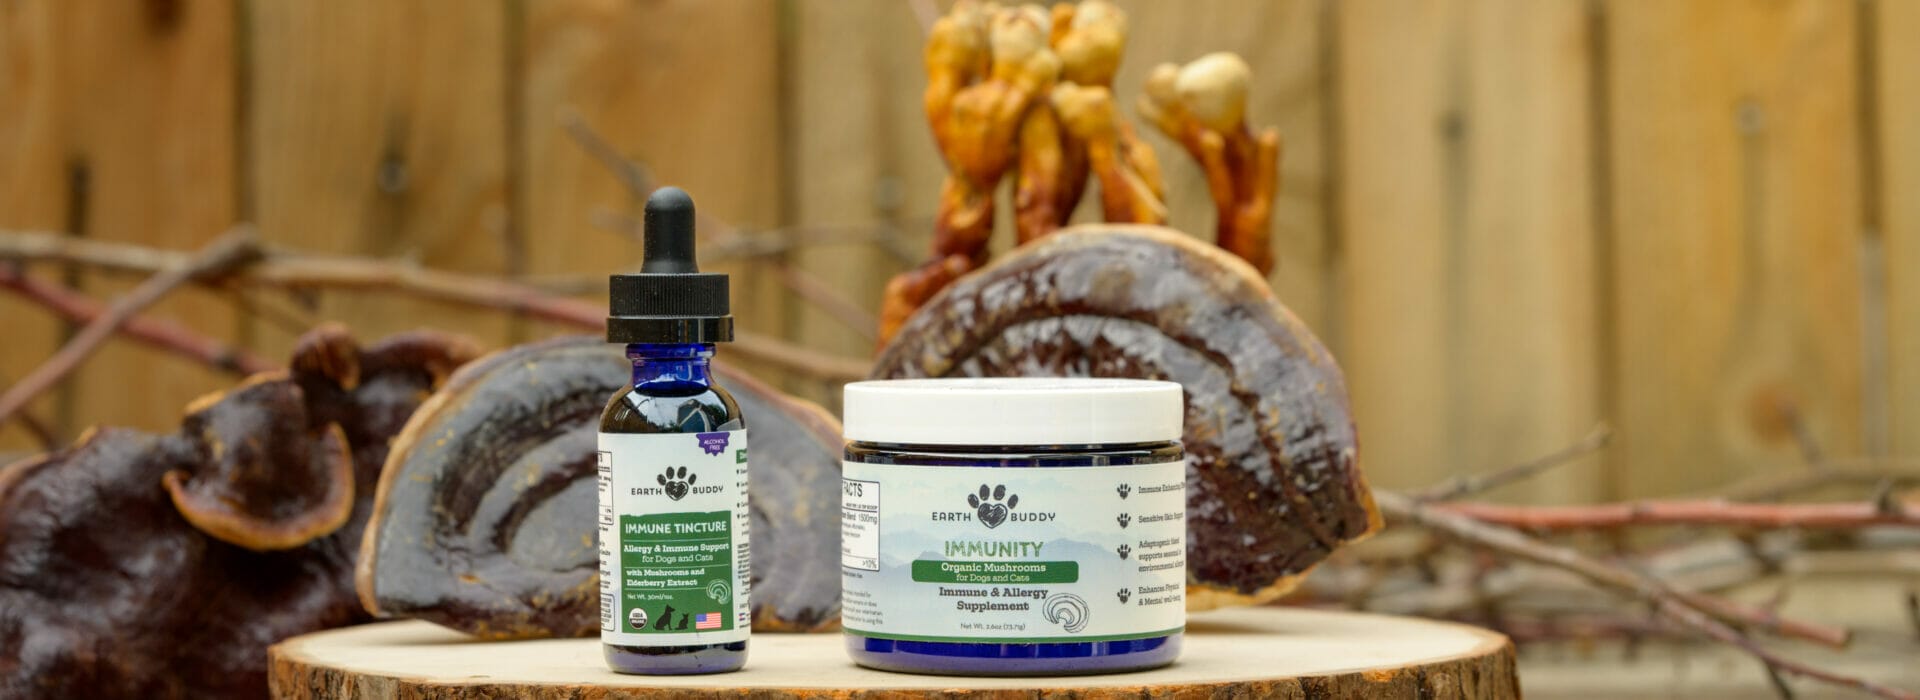 Earth Buddy organic mushroom tincture and mushroom powder for dogs and cats.